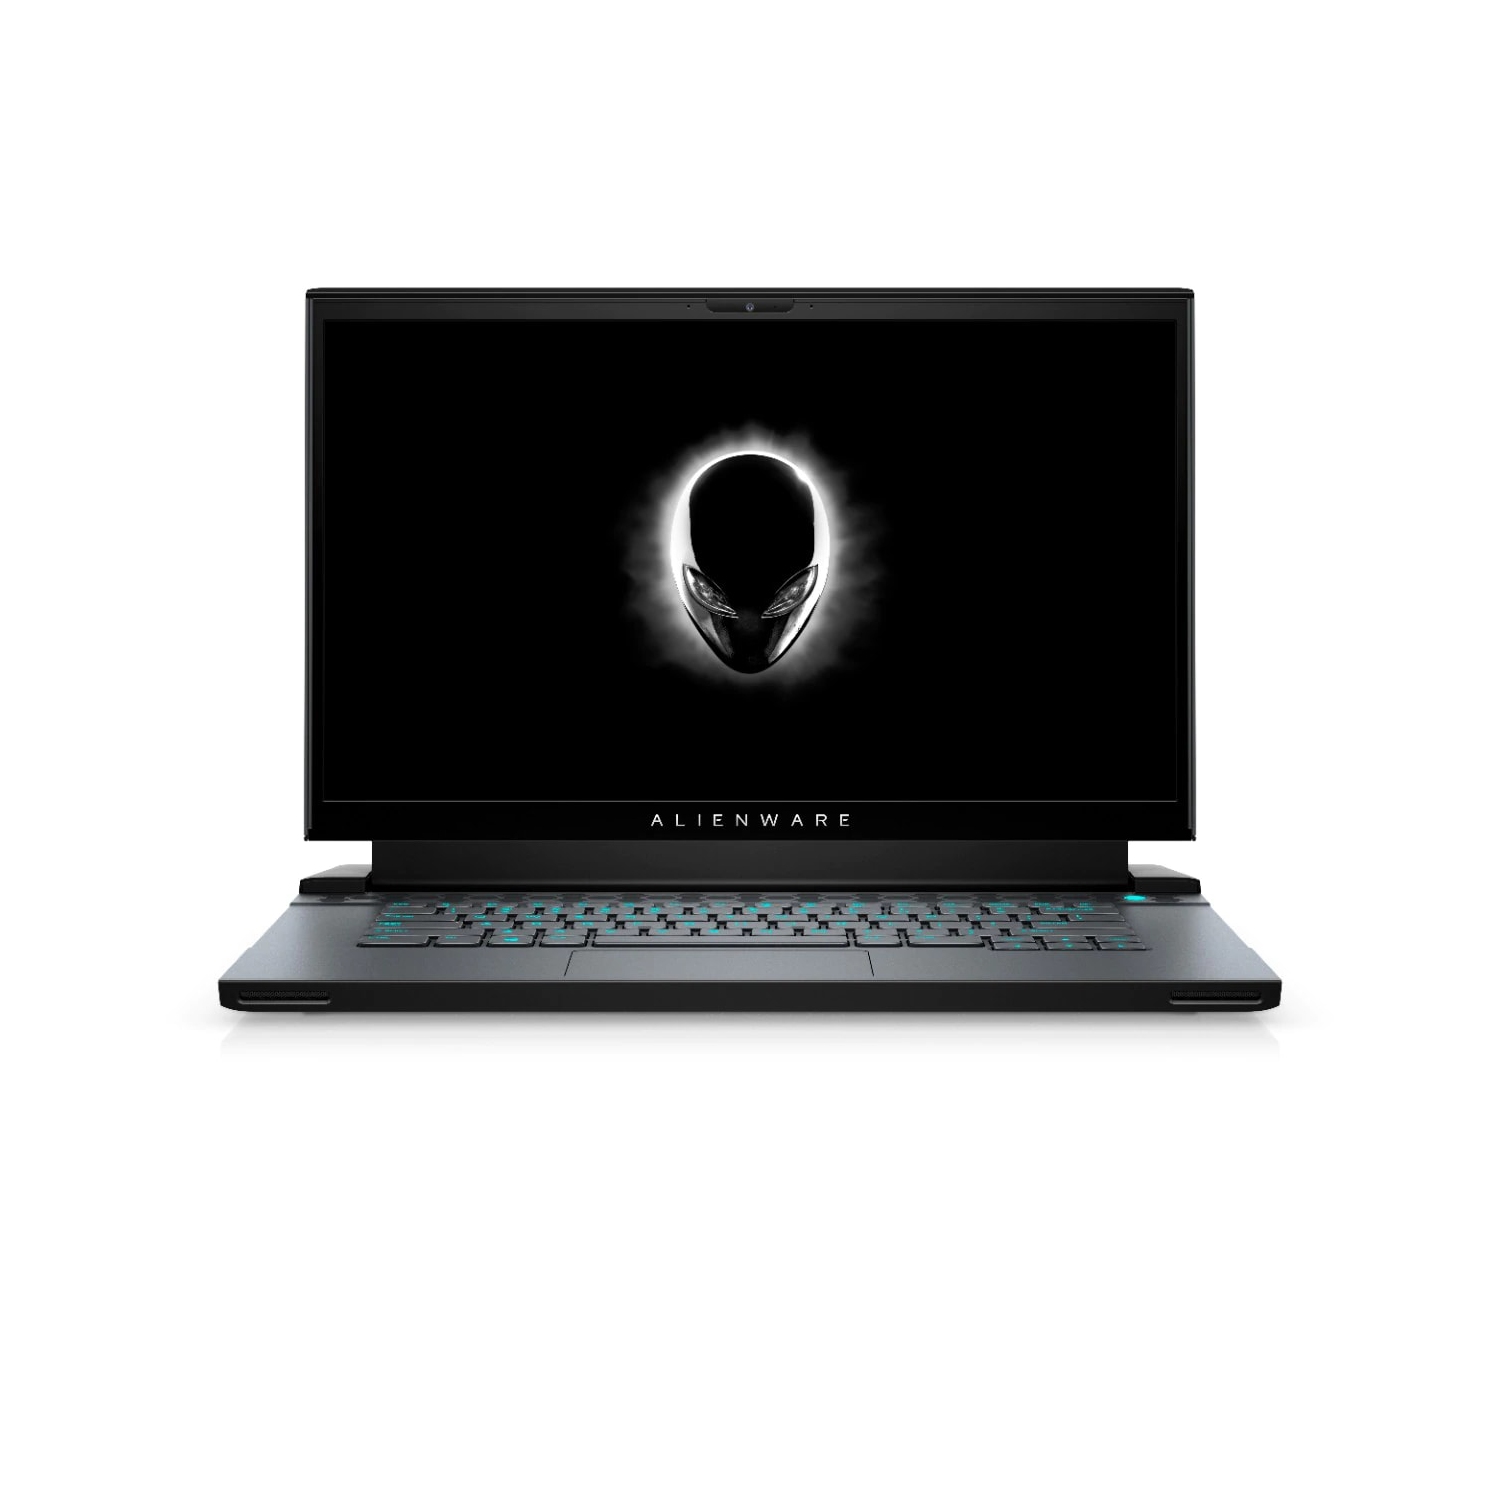 Refurbished (Excellent) - Dell Alienware m15 R4 Gaming Laptop (2021), 15.6" FHD, Core i7, 256GB SSD + 256GB SSD, 32GB RAM, RTX 3080, 5 GHz, 10th Gen CPU Certified